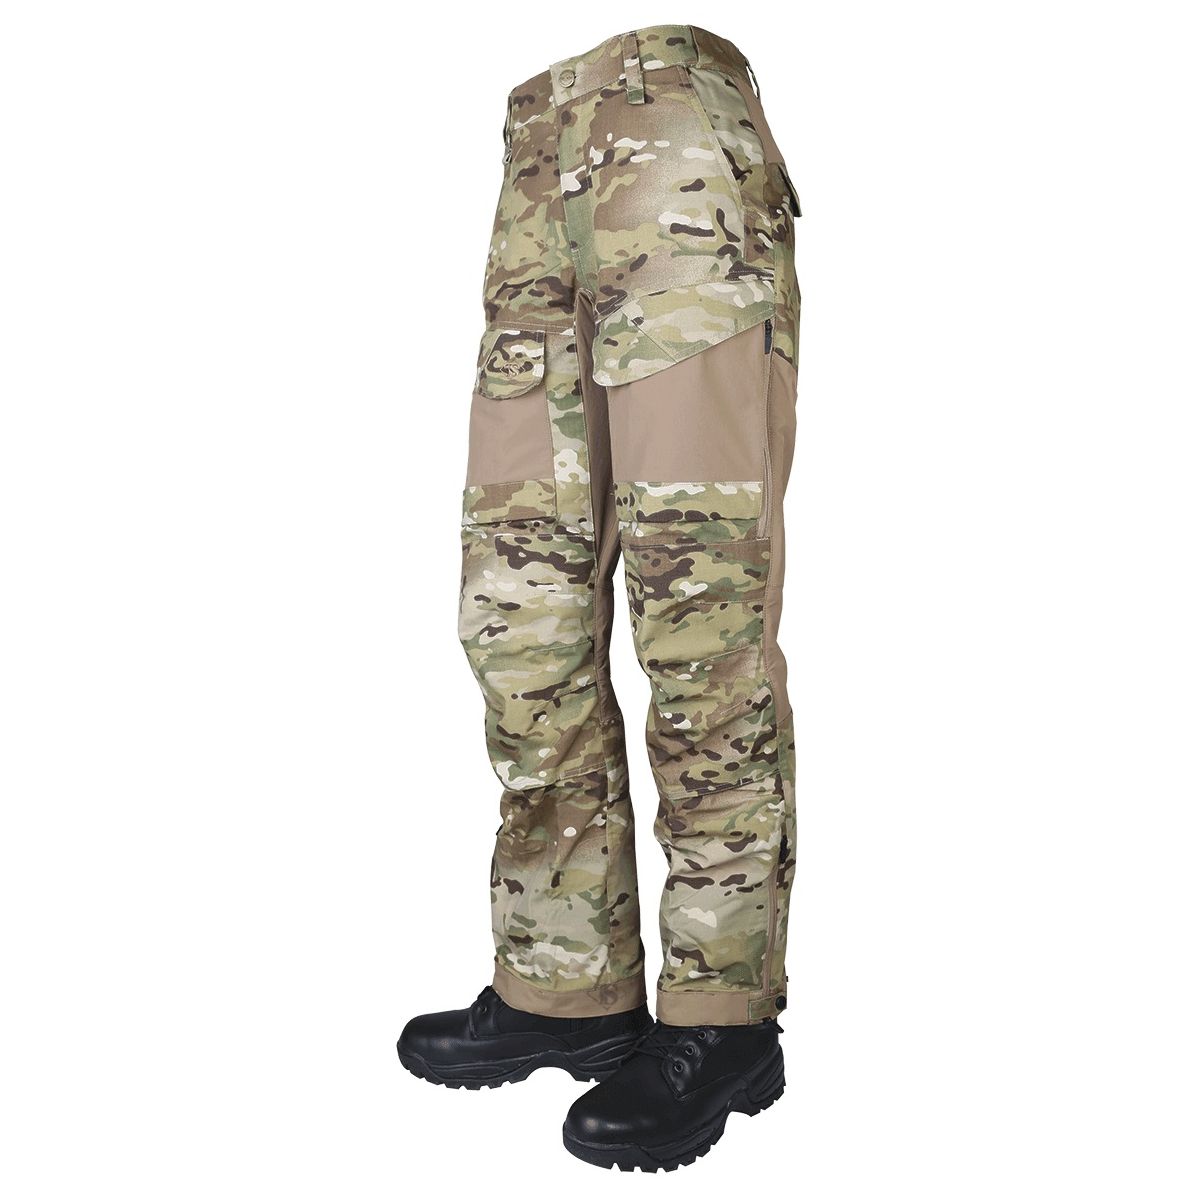 Kalhoty 24-7 XPEDITION MULTICAM®/COYOTE Velikost: 30-34